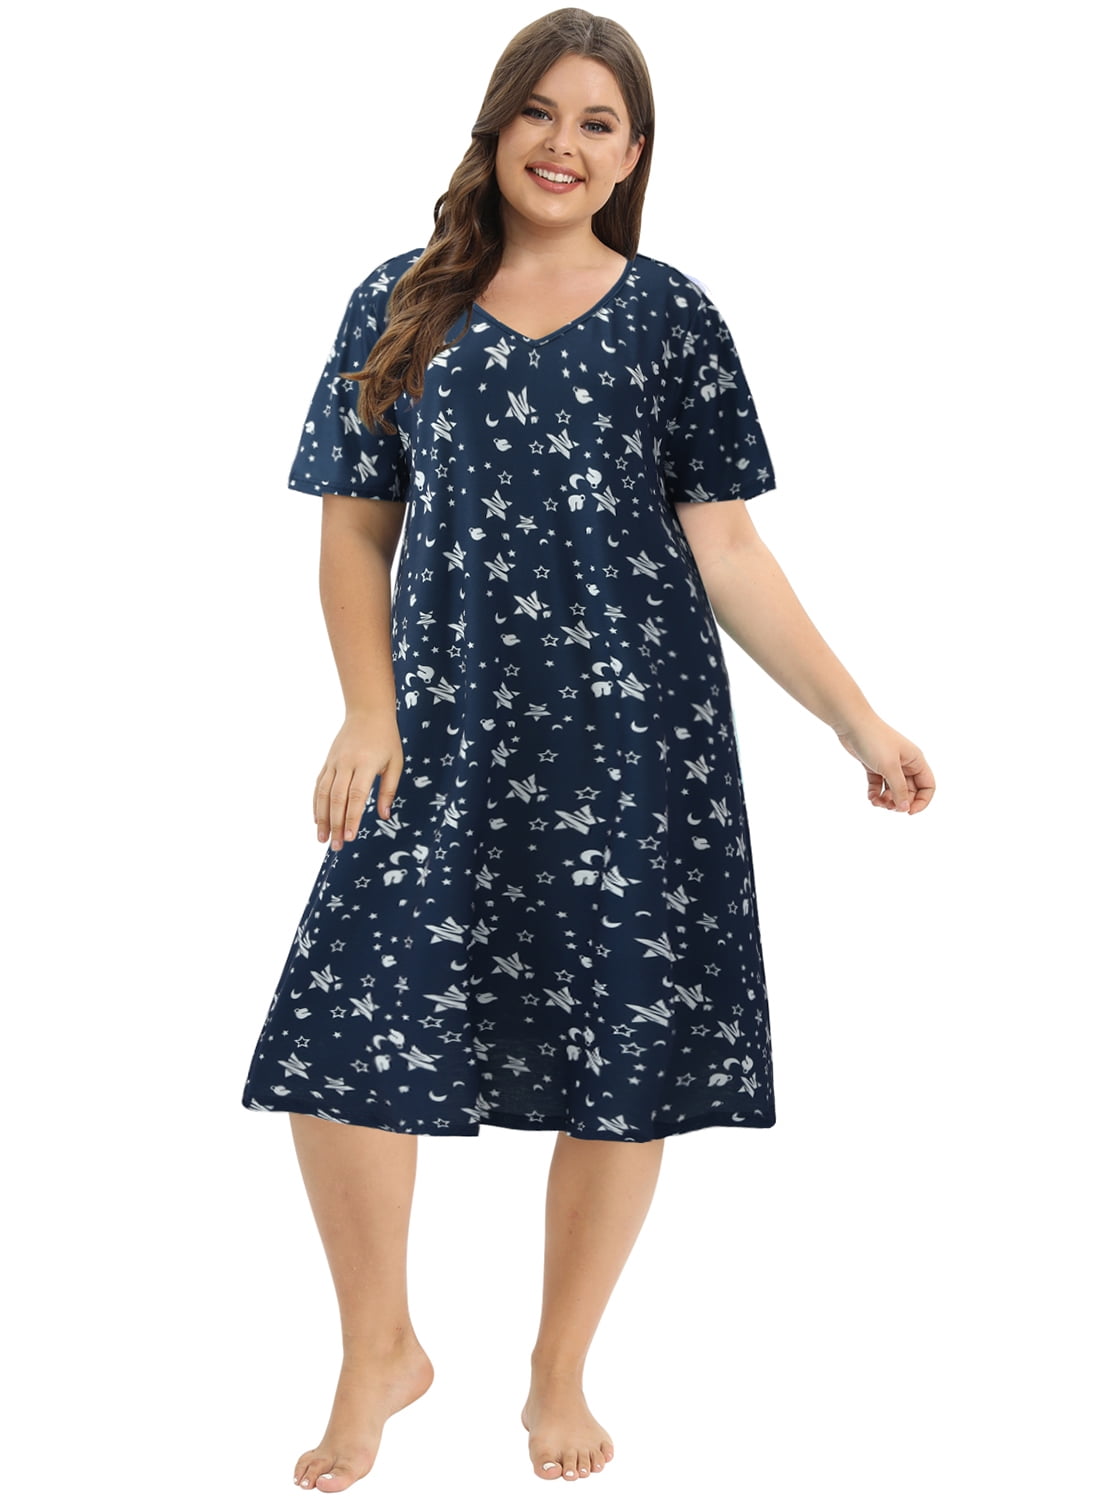 WBQ Womens Nightdress Ankle-Length Nightgowns Short Sleeve V Neck ...